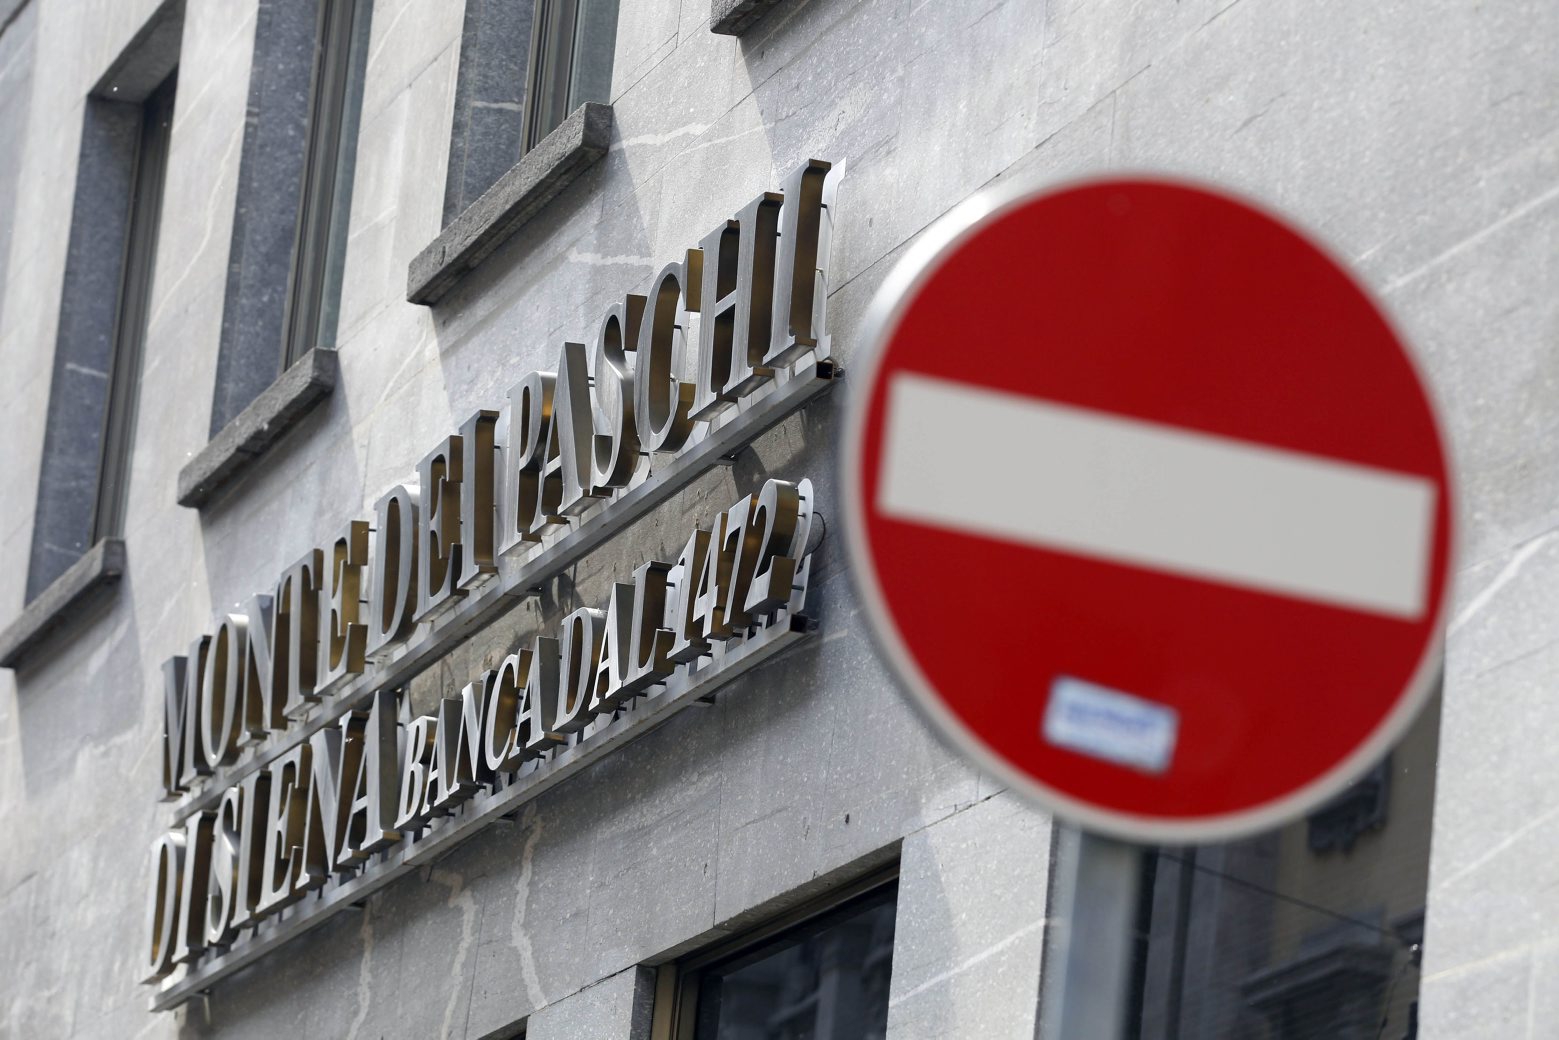 An external view of a Monte Dei Paschi di Siena bank branch in Milan, Italy, Wednesday, May 9, 2012.  Shares of the Italian bank Monte dei Paschi di Siena have tumbled after financial police searched its offices in connection with a market rigging probe in the 2007 acquisition of Banca Antonveneta SpA. (AP Photo/Luca Bruno) ITALIEN BANK MONTE DEI PASCHI DI SIENA